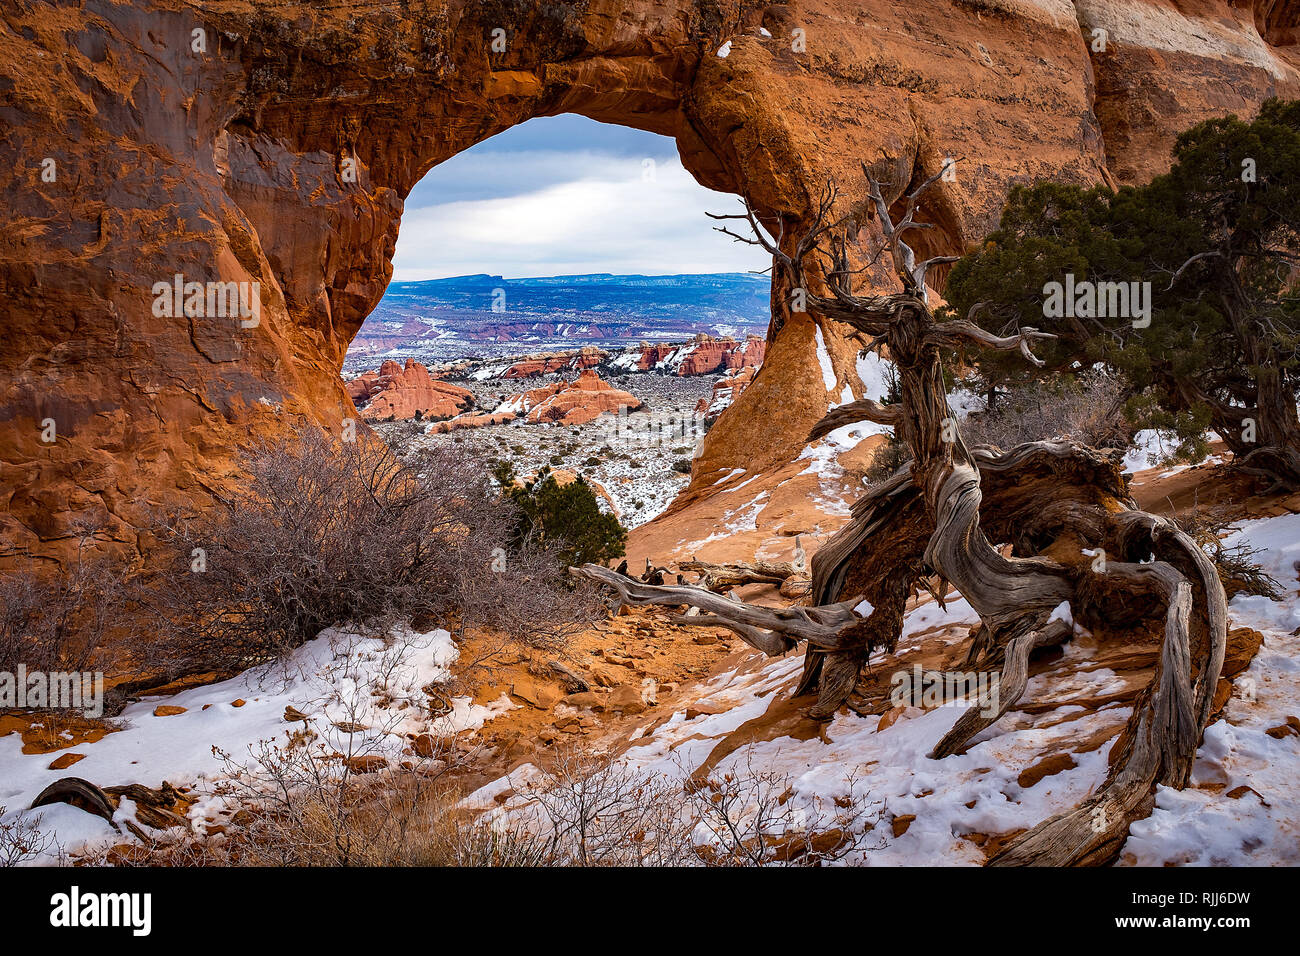 January 2019: A winter's view as seen through the Partition Arch along Devil's Garden Trail in Arches National Park, Moab, Utah. Stock Photo